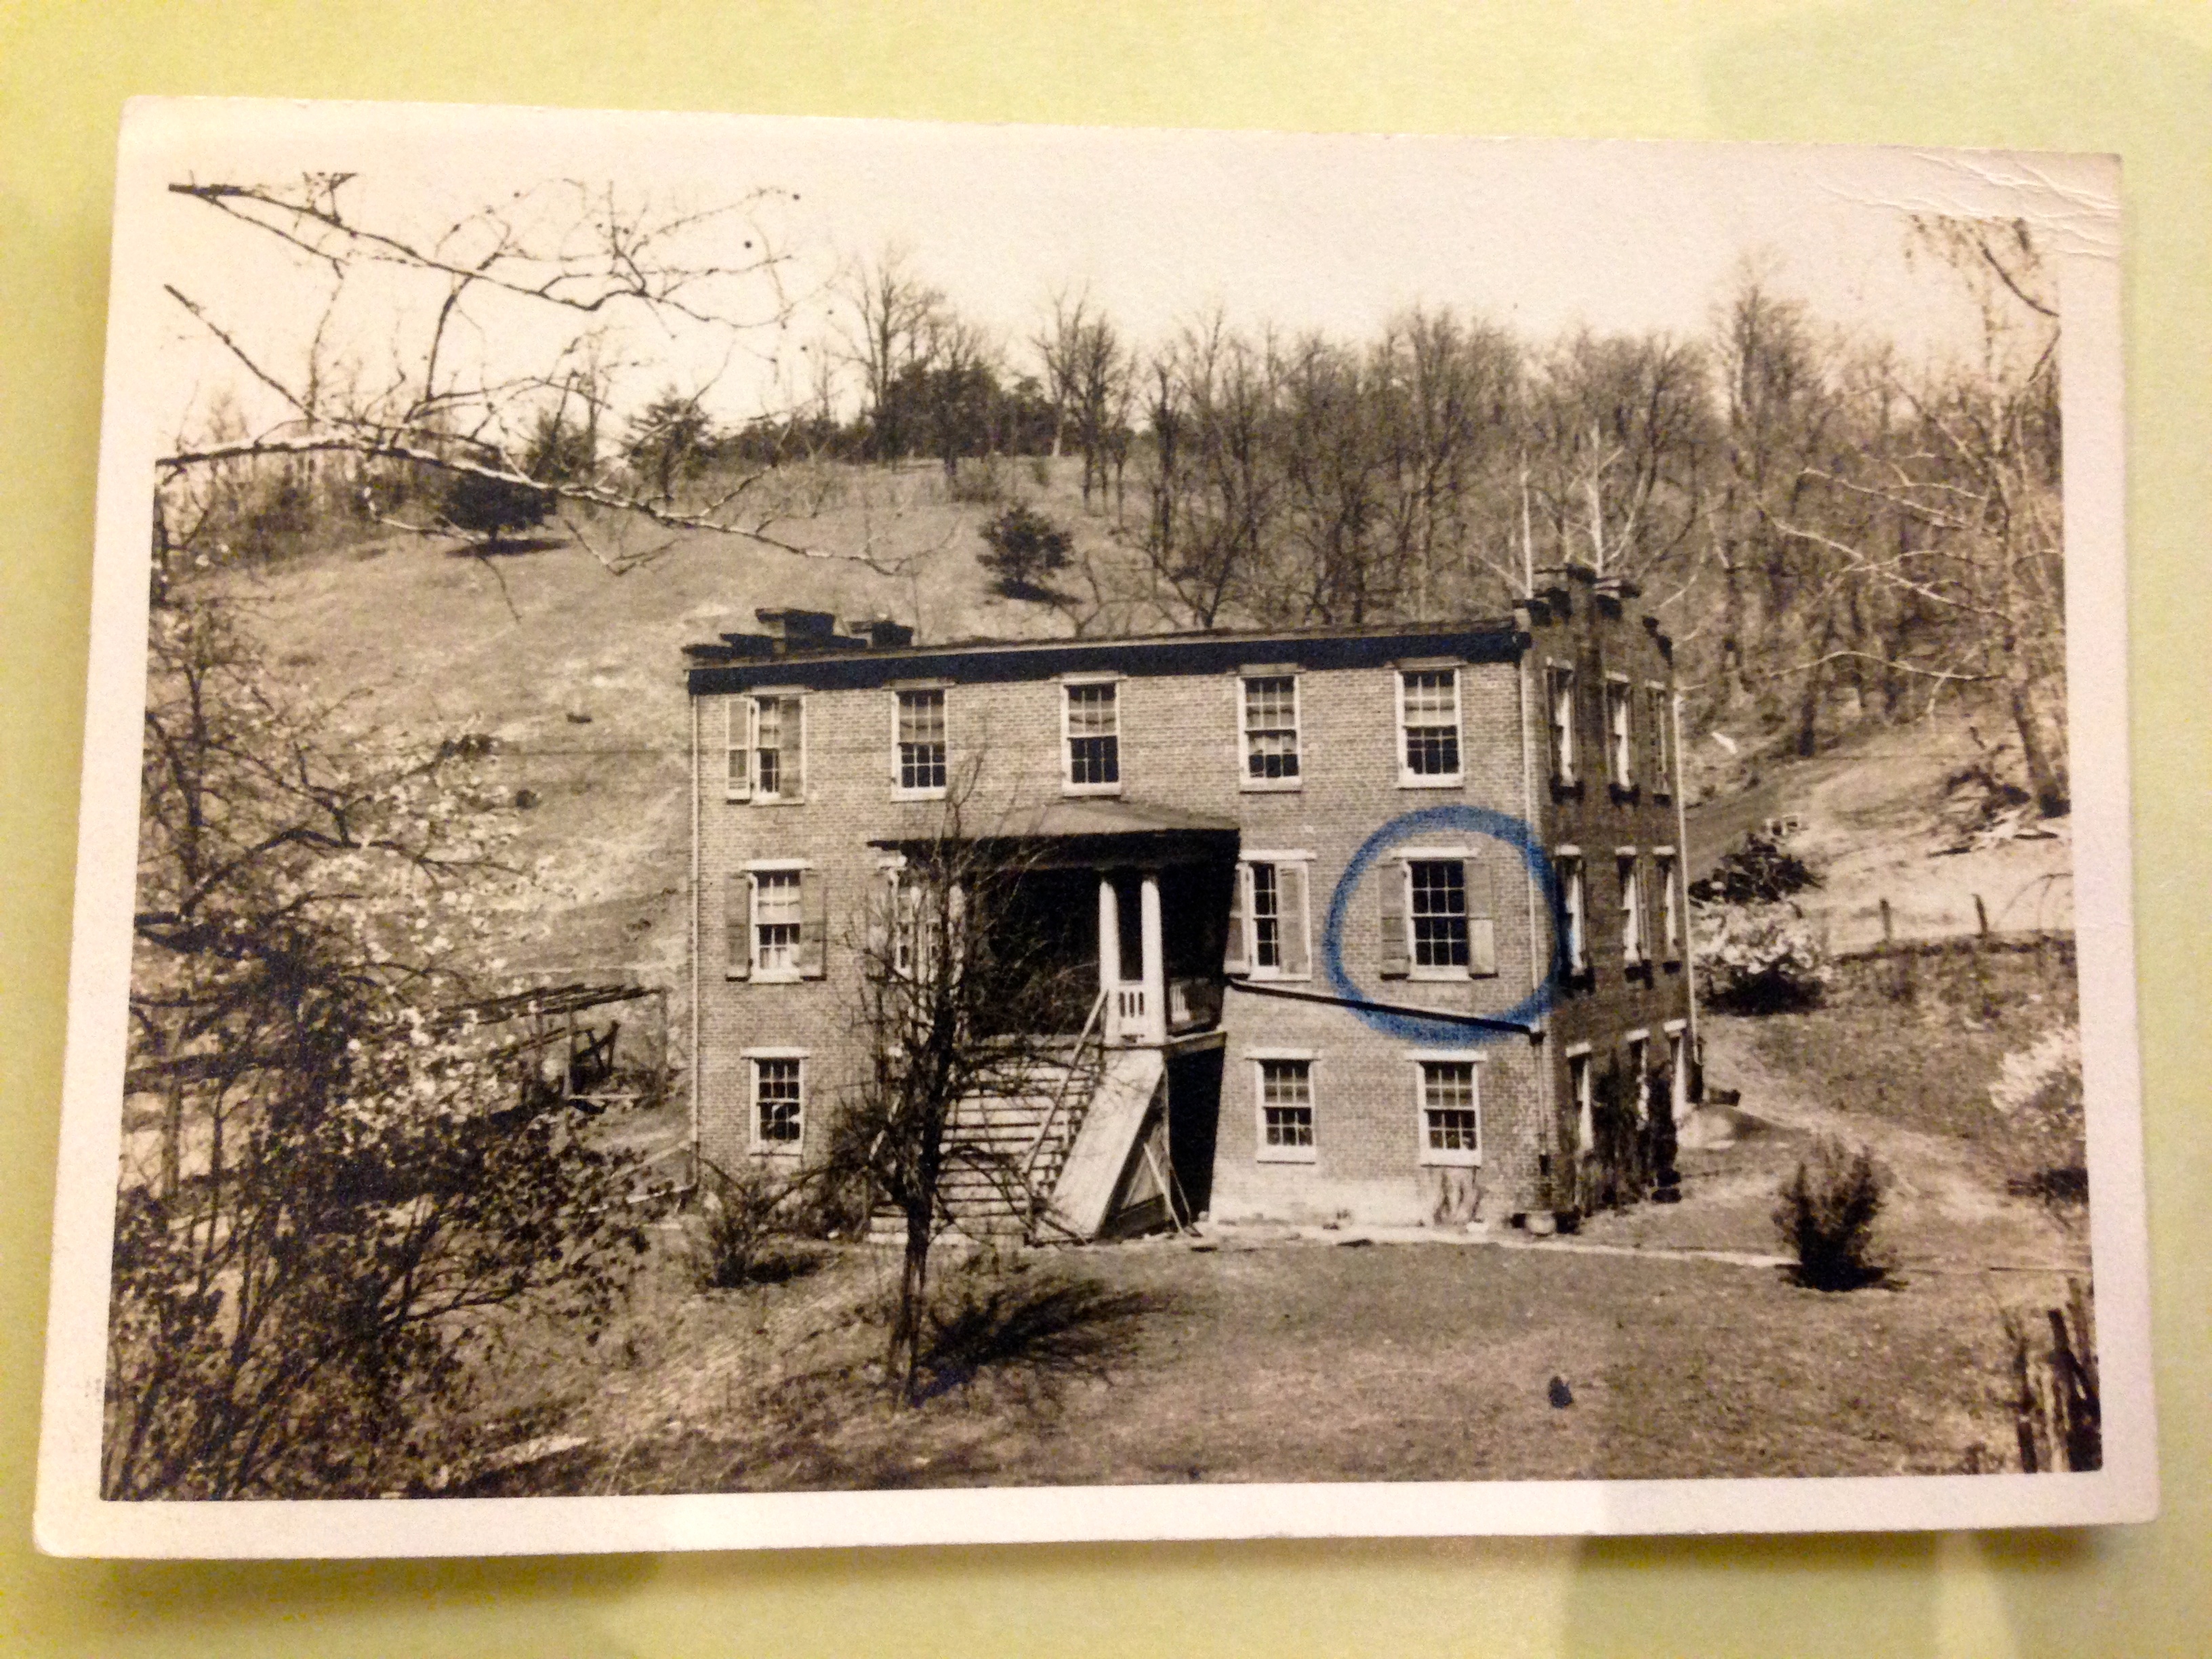 Cather's childhood home in Willow Shade, VA, n.d. (MSS 6494. Photograph by Emily Caldwell.)